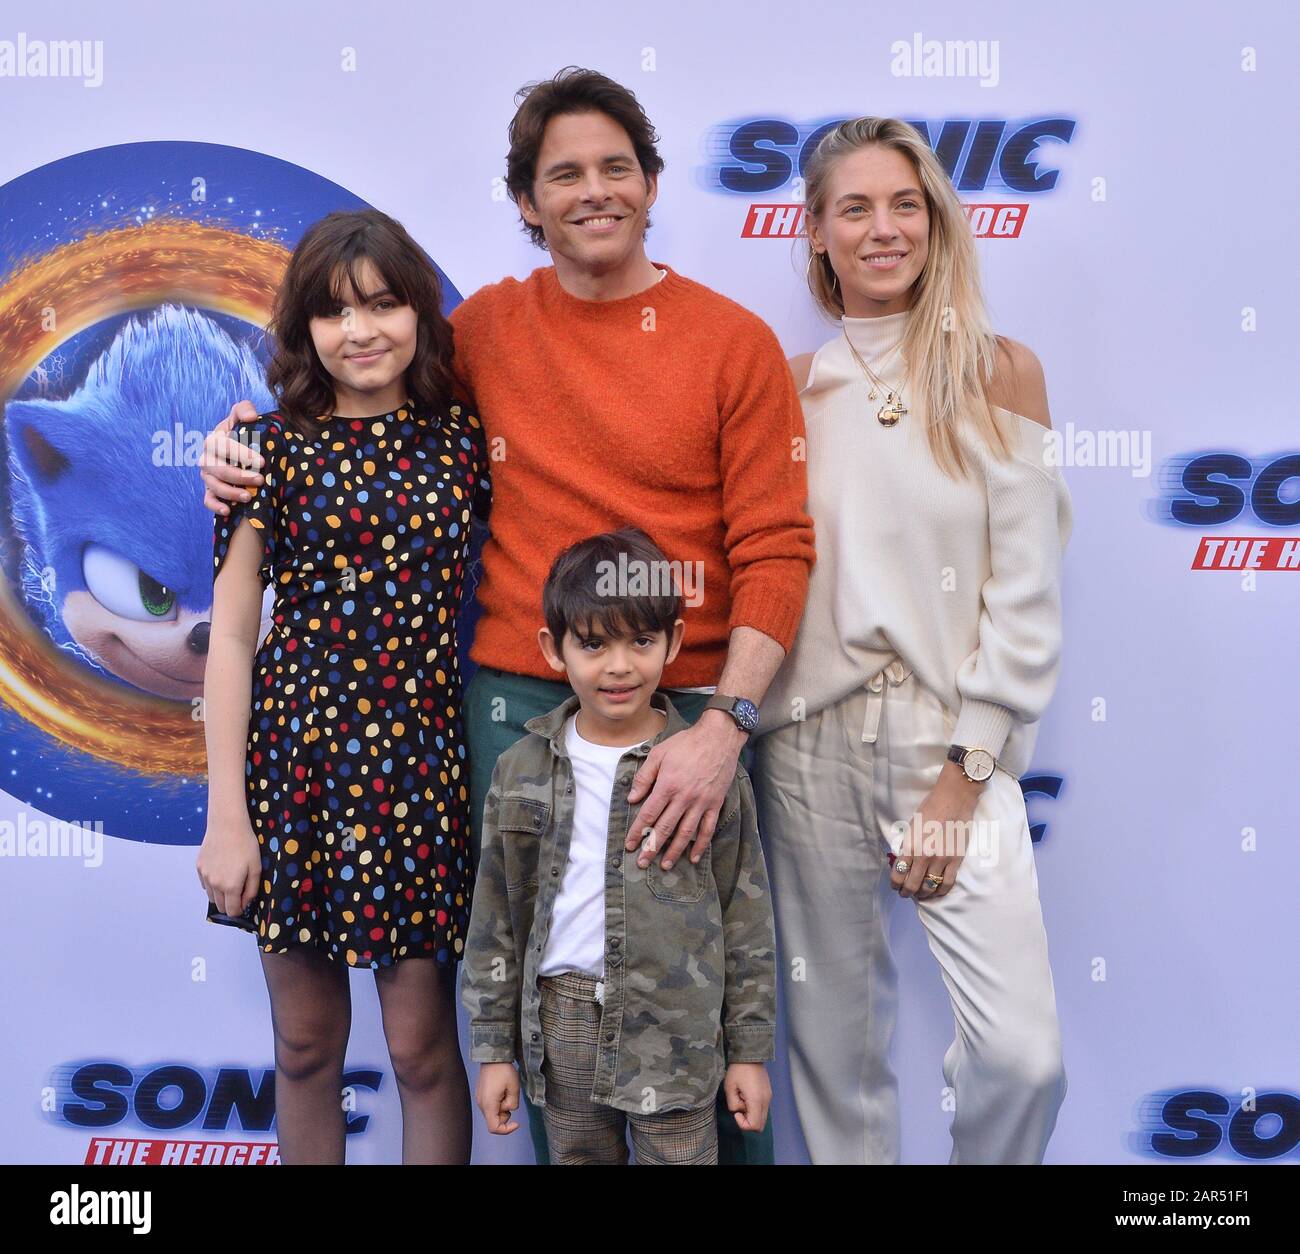 Cast member James Marsden and his family attend the 'Sonic the Hedgehog' family day event on the Paramount Pictures lot in Los Angeles on Saturday, January 25, 2020. Storyline: Based on the global blockbuster videogame franchise from Sega, 'Sonic the Hedgehog' tells the story of the world's speediest hedgehog as he embraces his new home on Earth. Photo by Jim Ruymen/UPI Credit: UPI/Alamy Live News Stock Photo